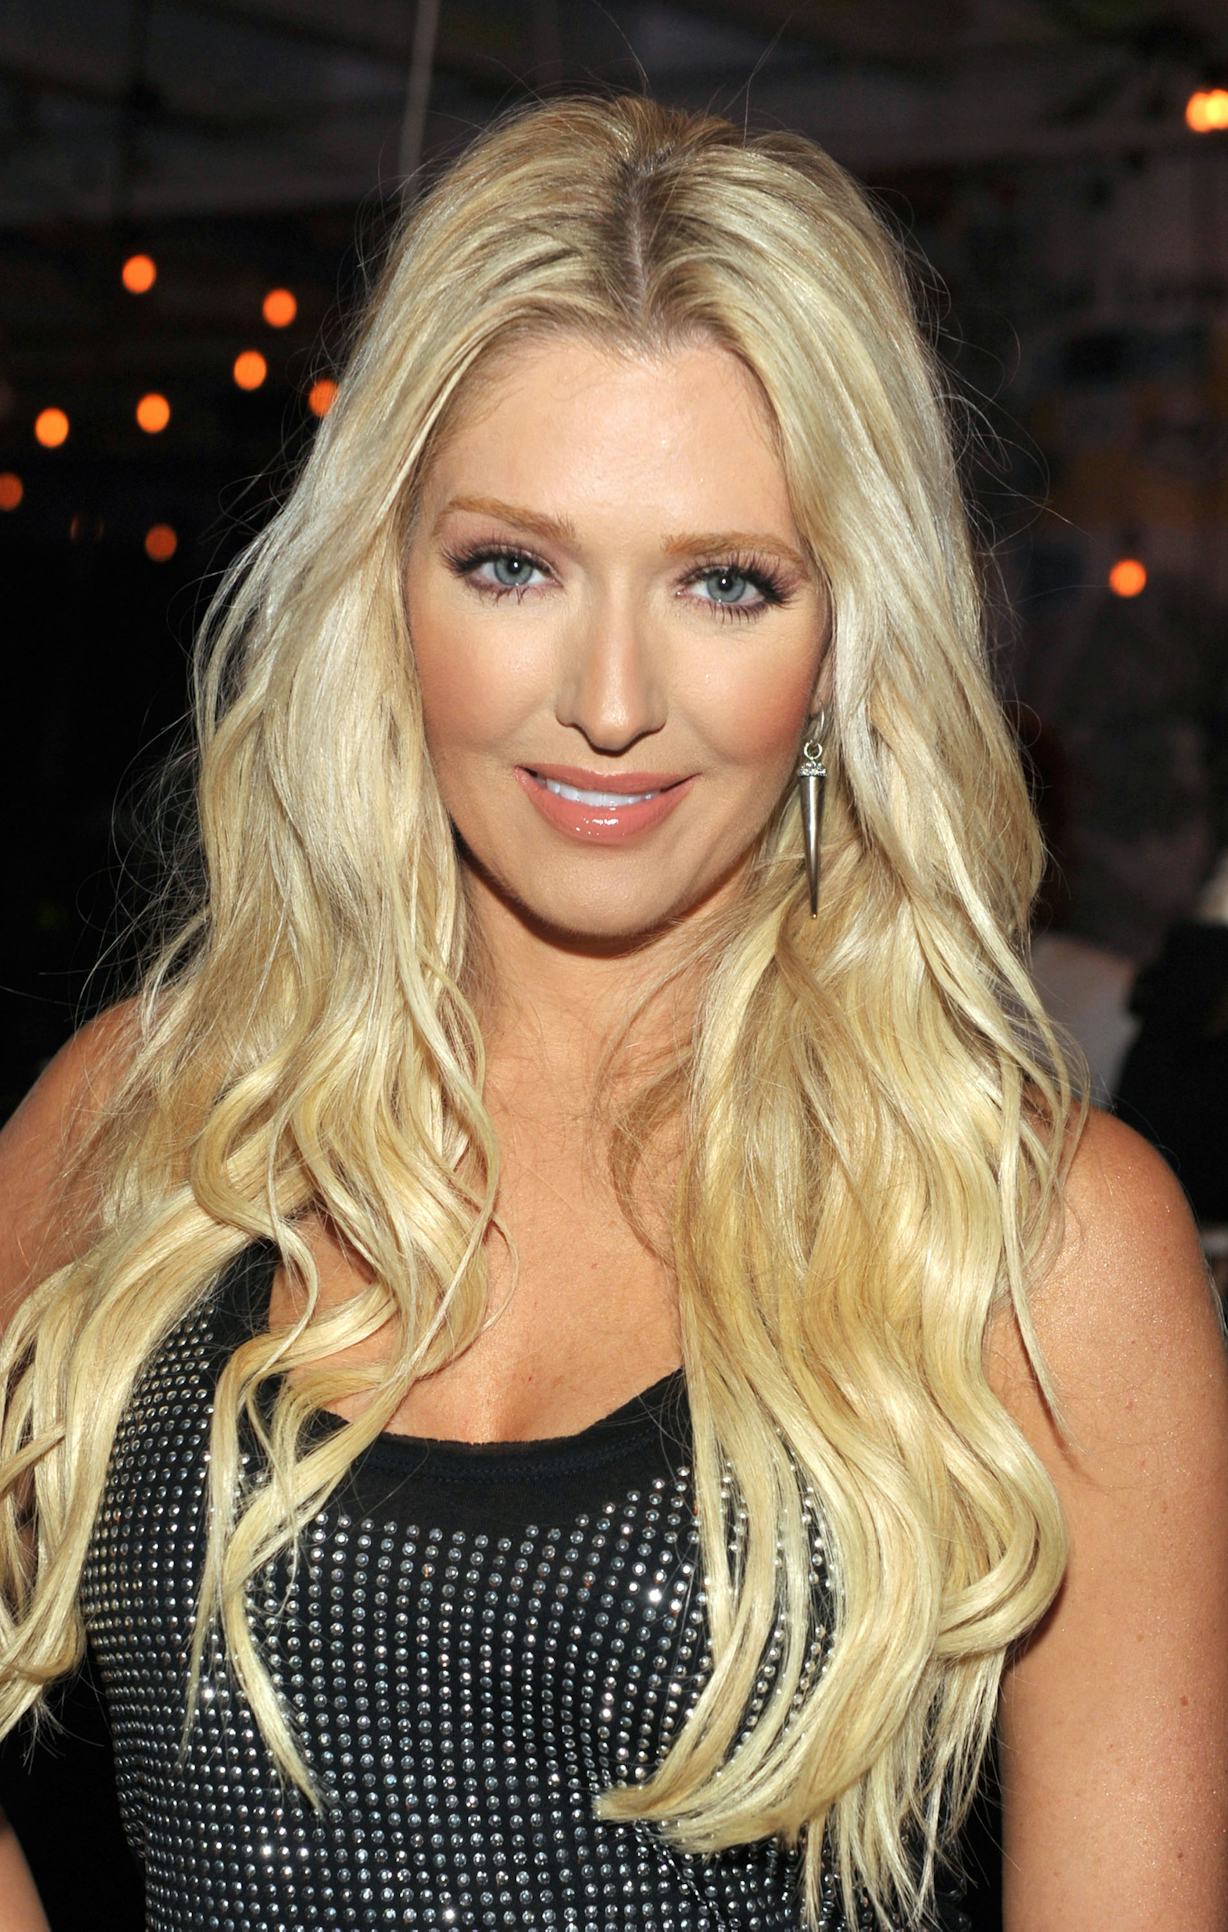 Is Erika Jayne A Stage Name The Real Housewives Of Beverly Hills